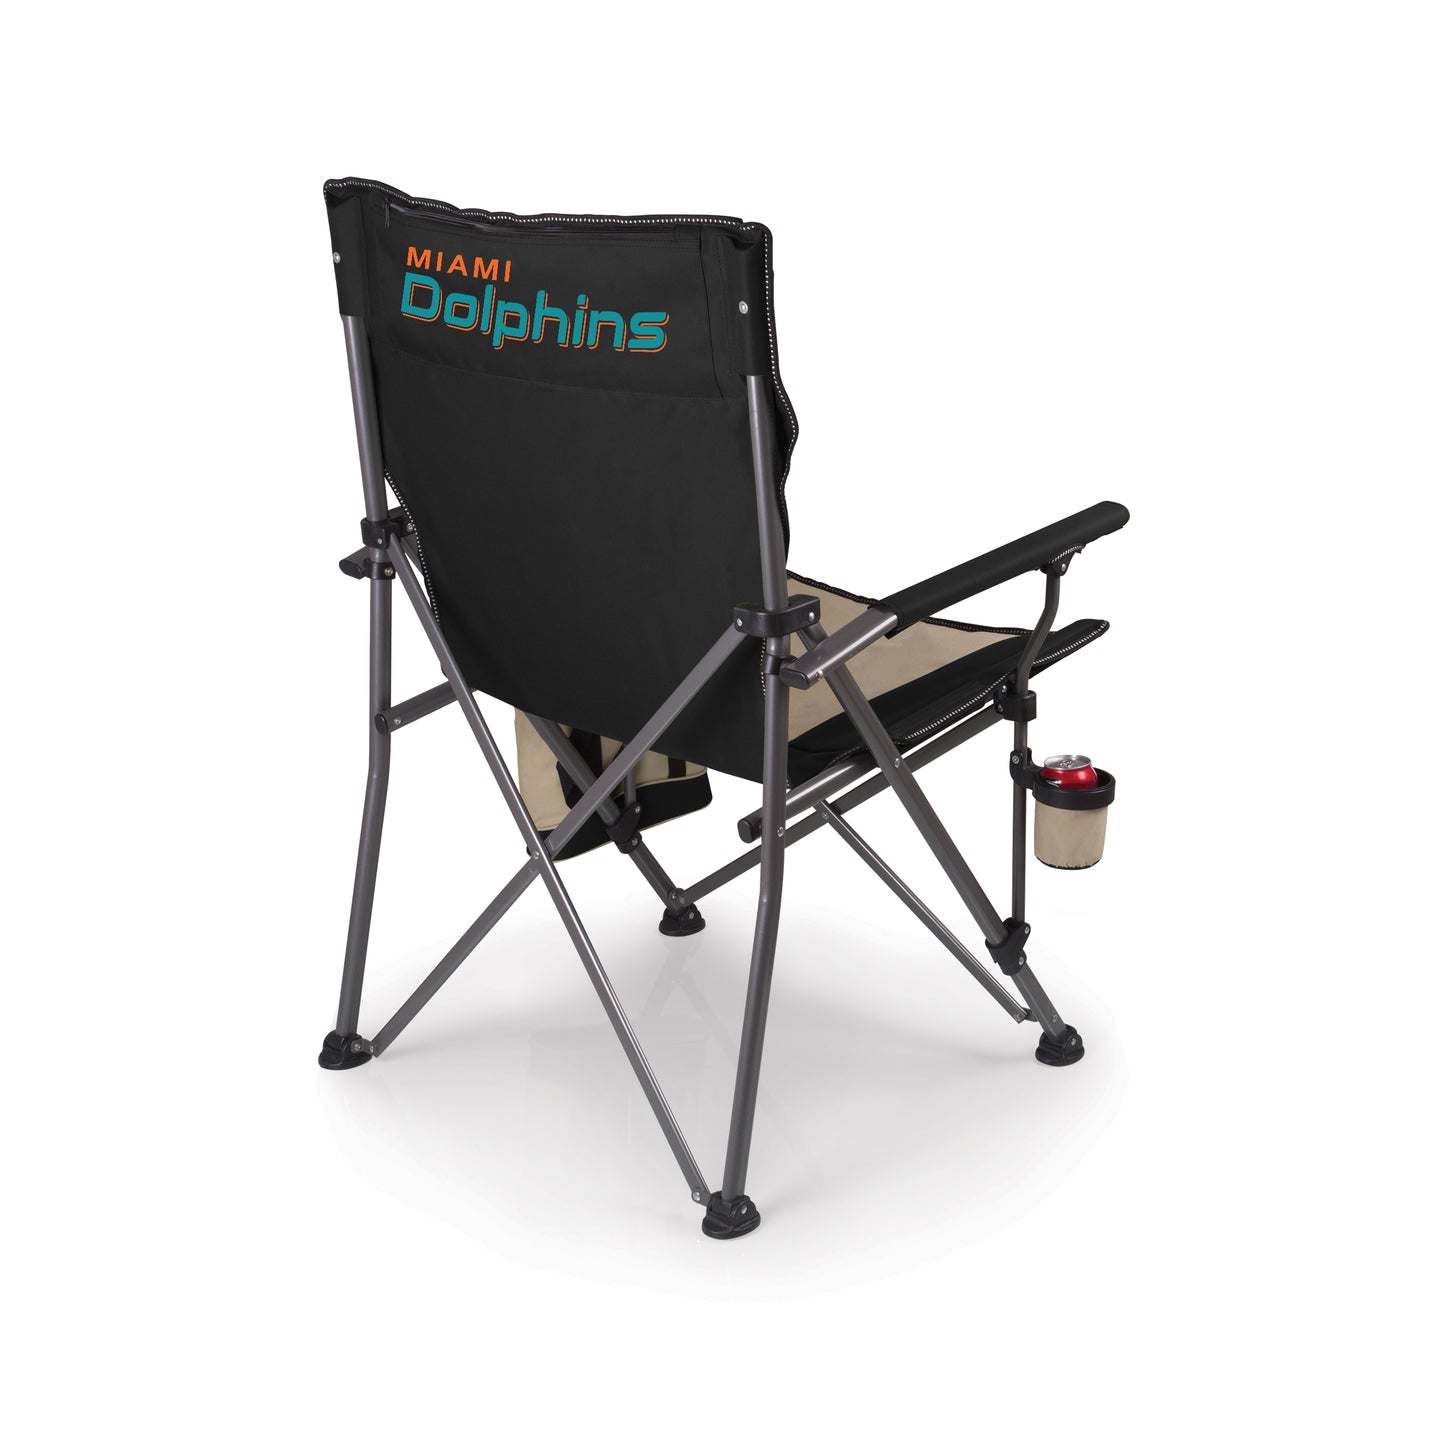 Miami Dolphins - Big Bear XL Camp Chair with Cooler